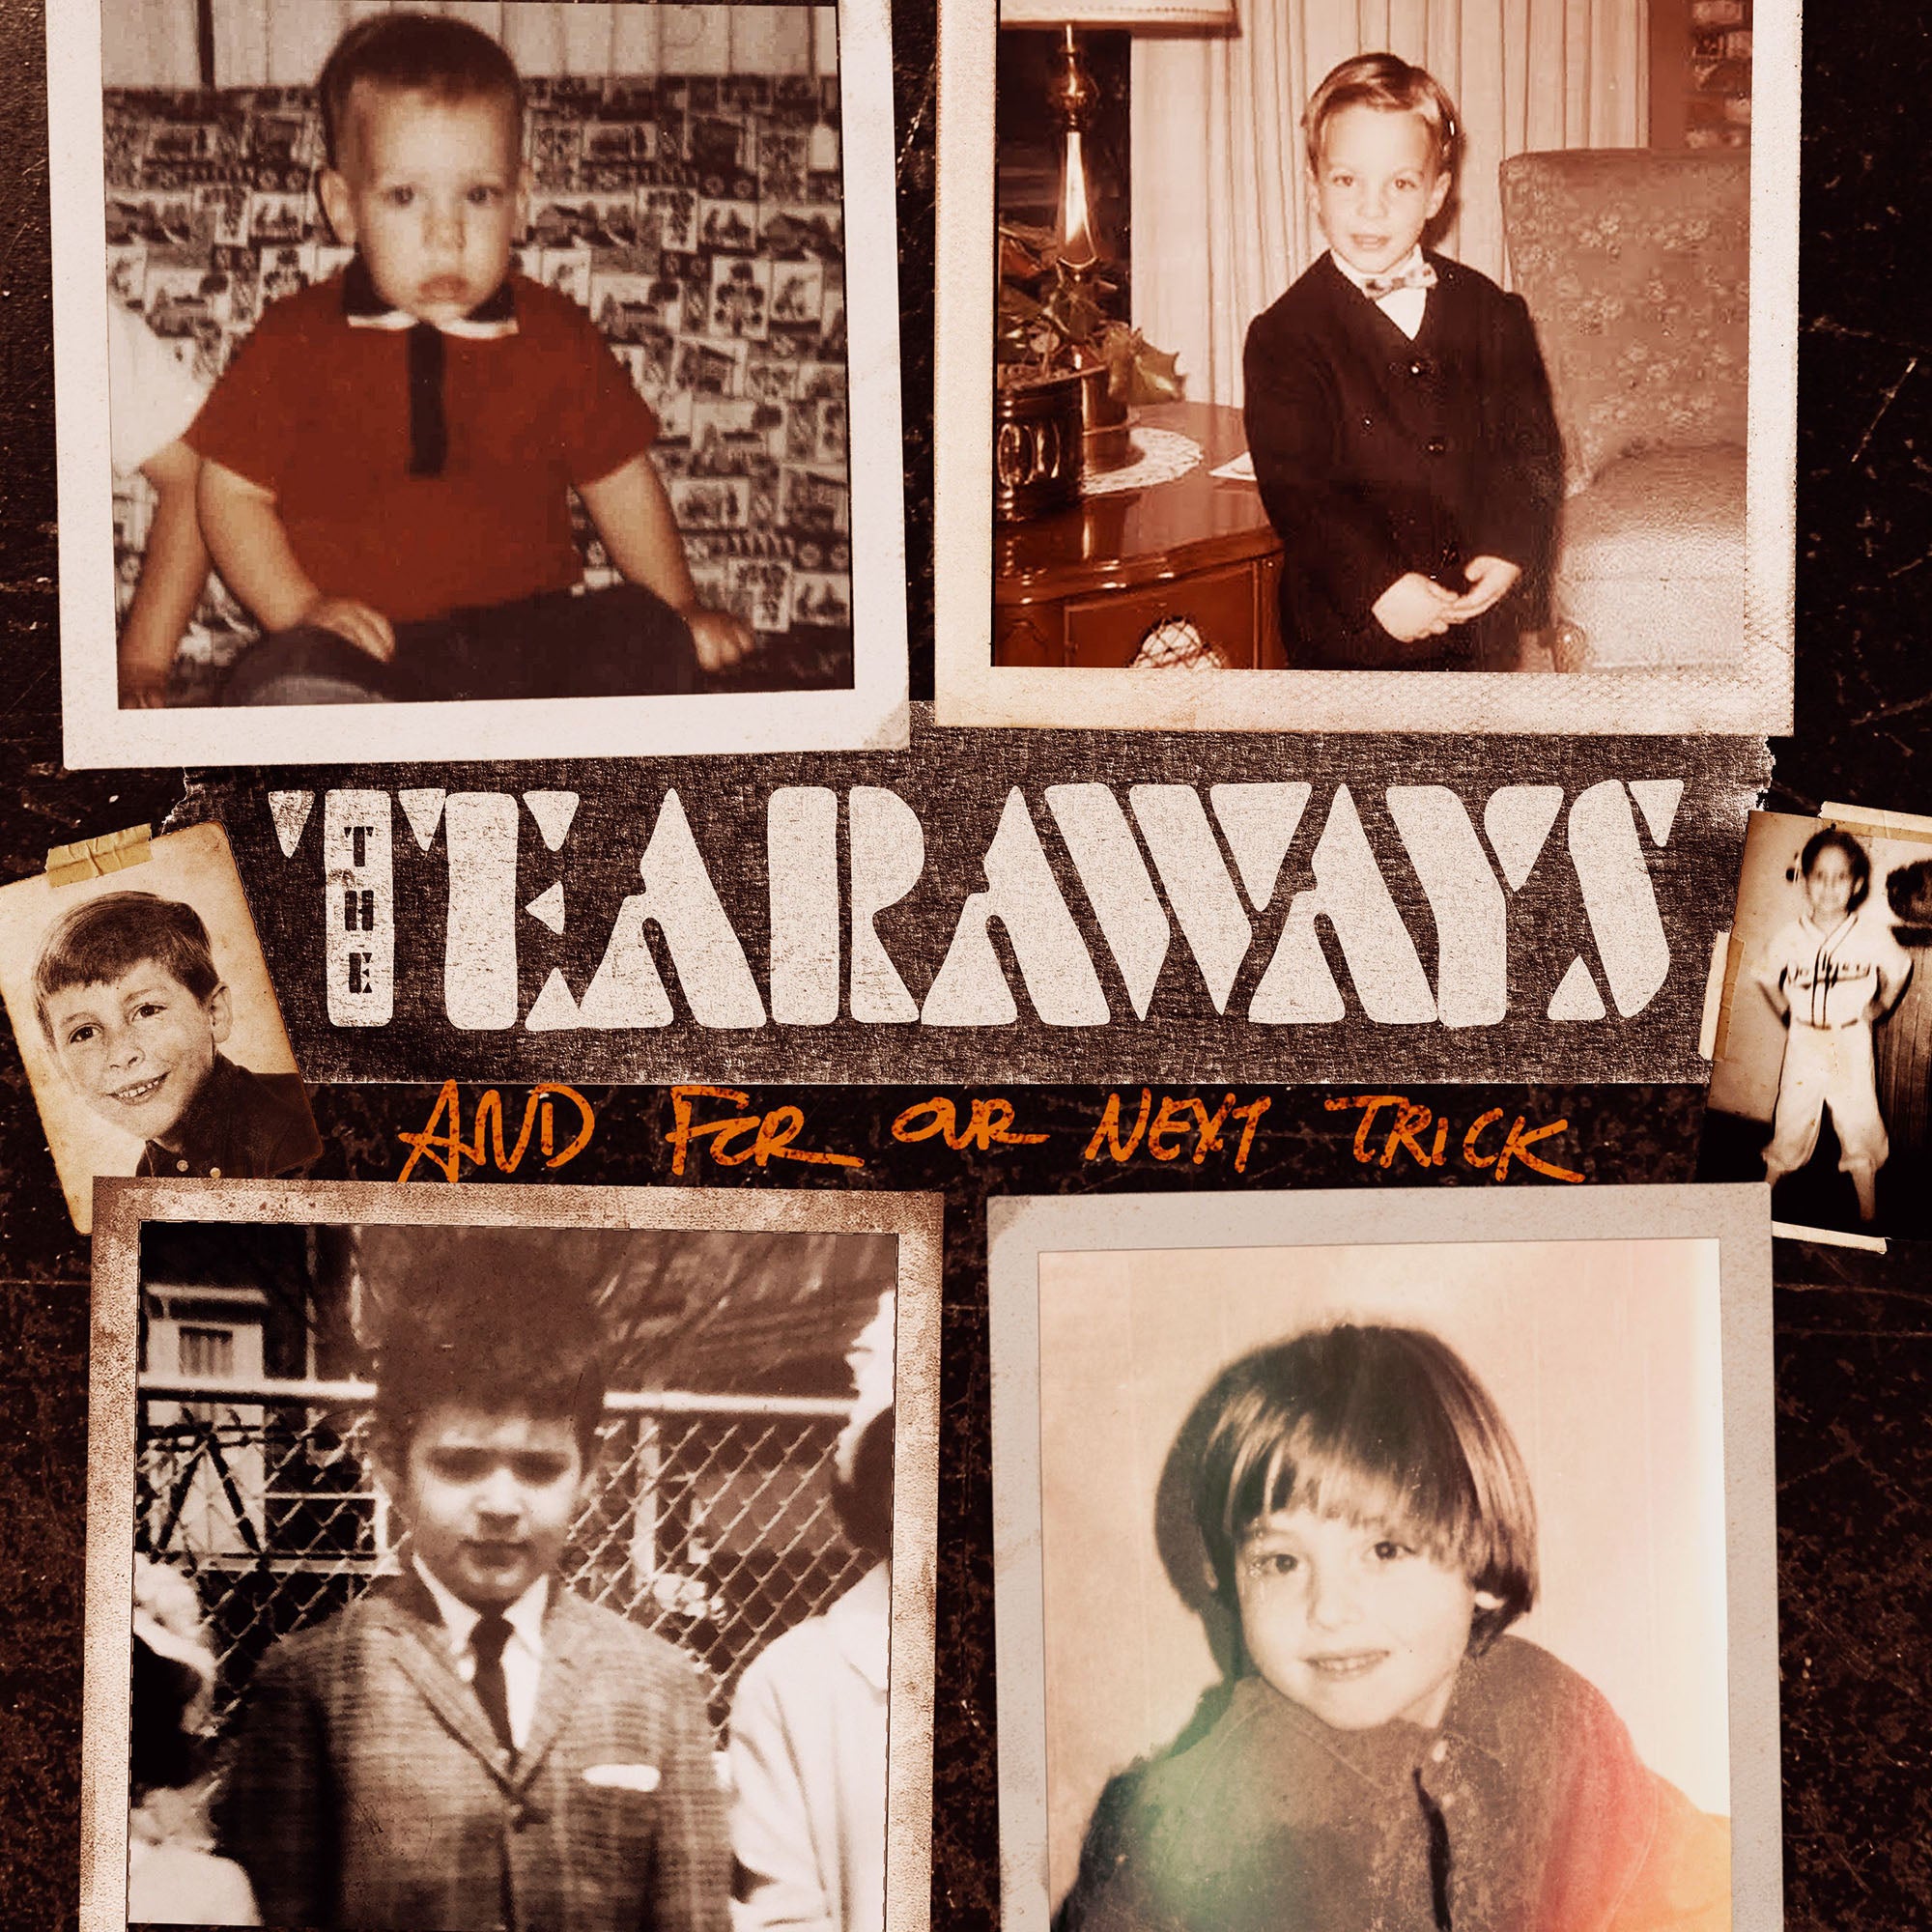 The Tearaways – And For Our Next Trick